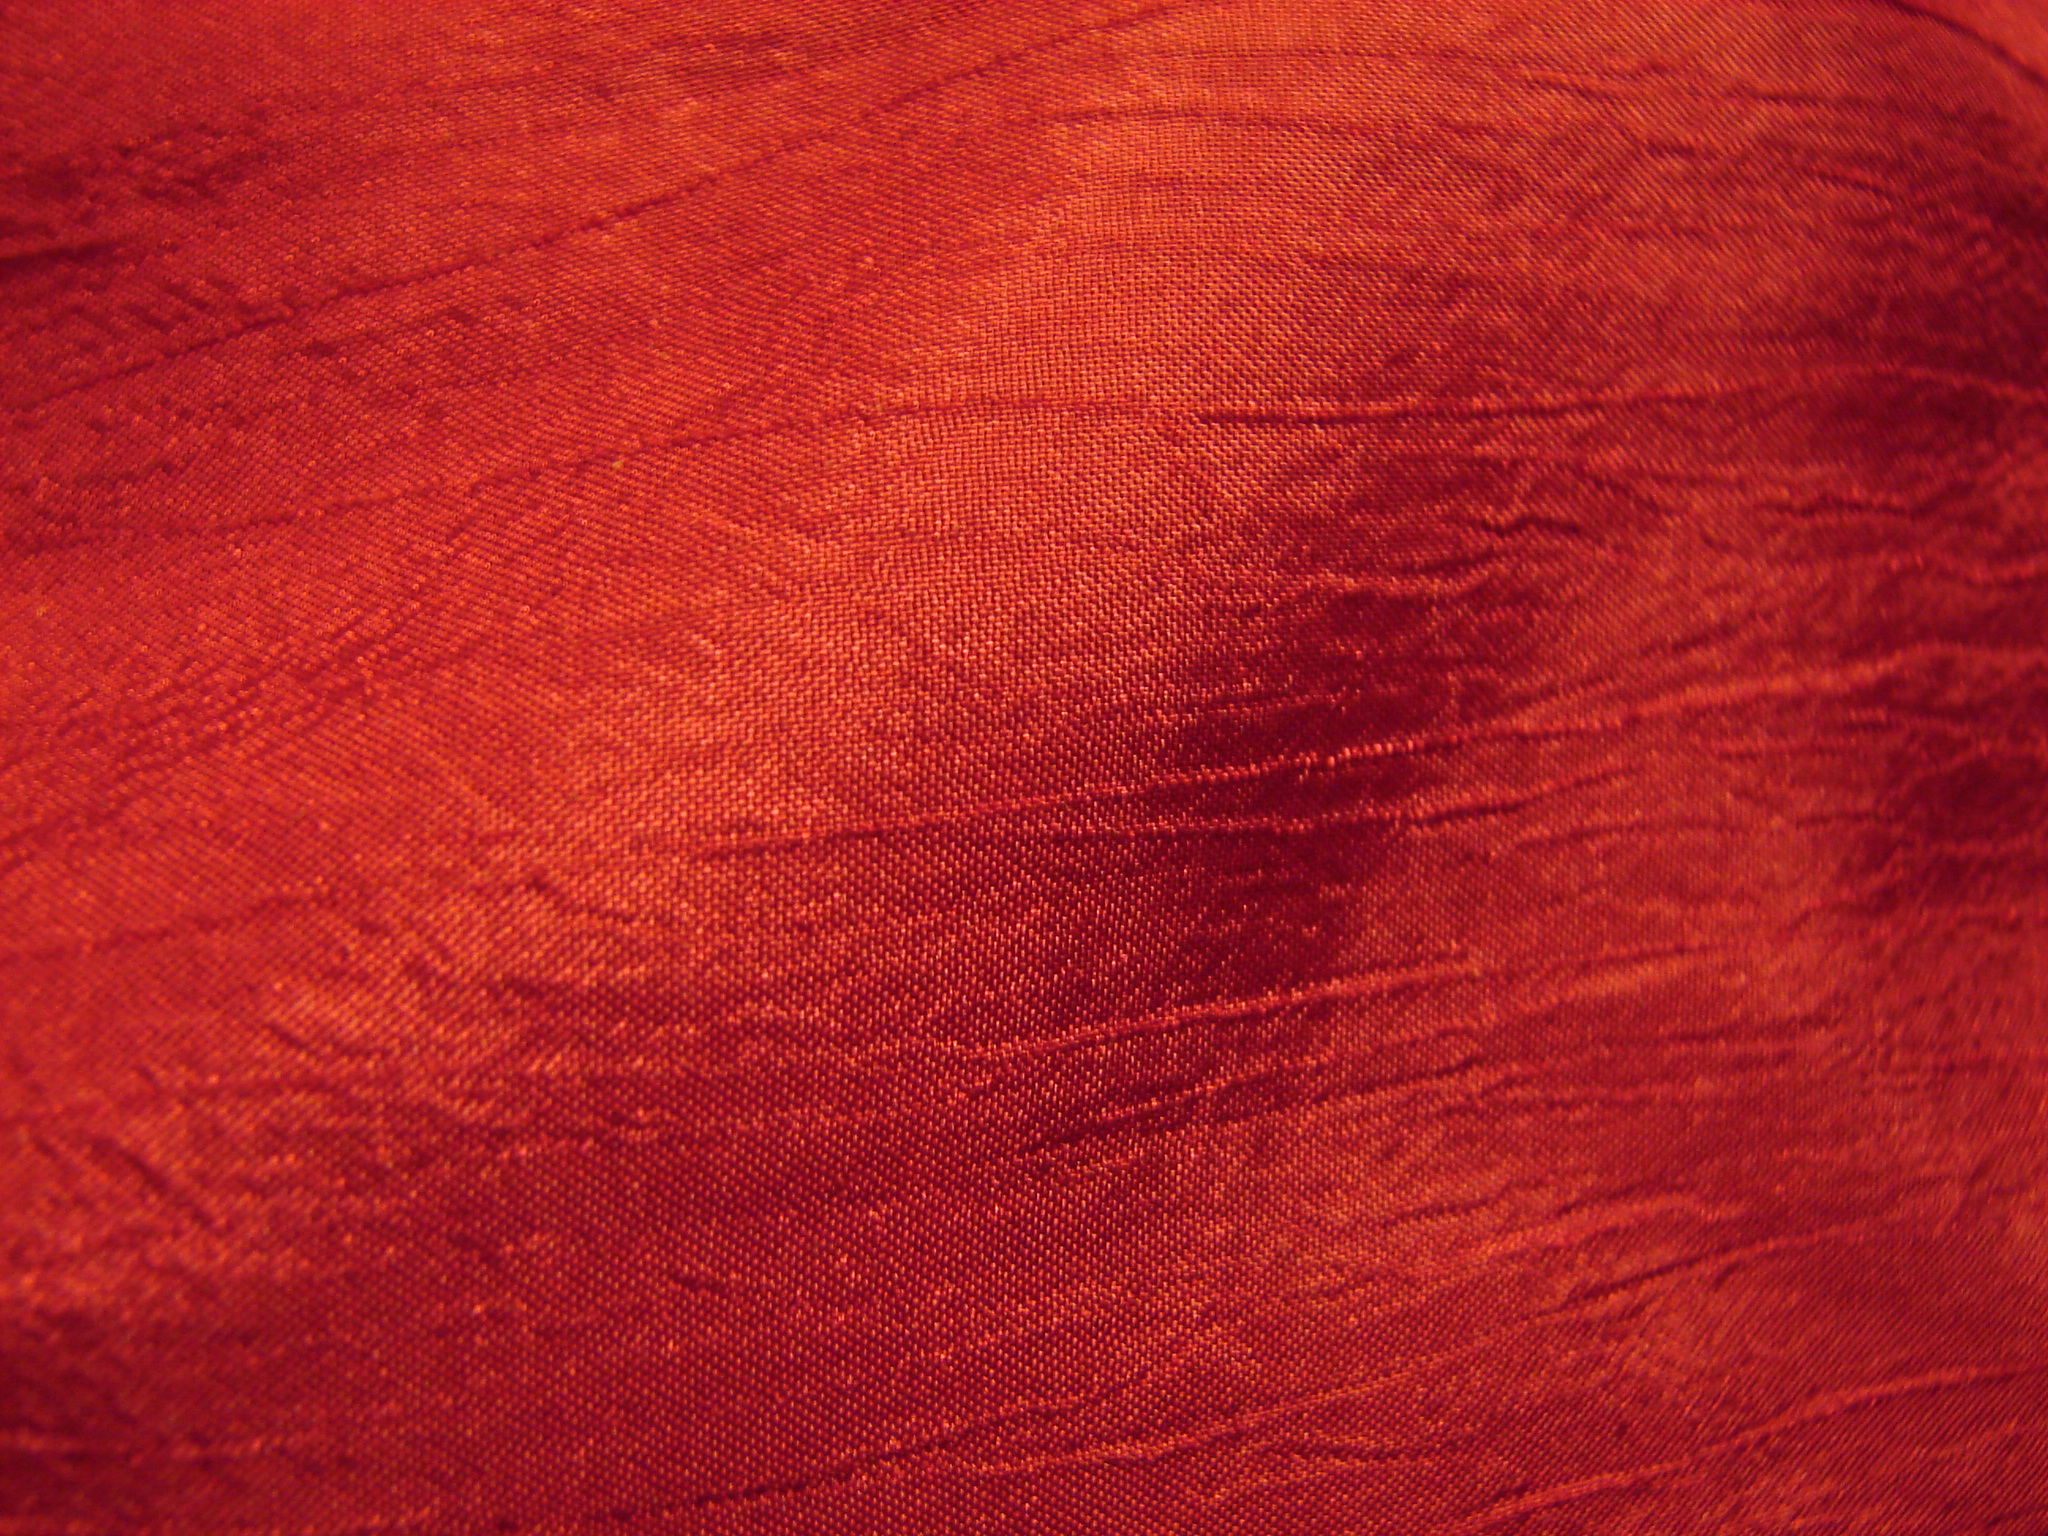 Red Silk Fabric Texture By Fantasystock